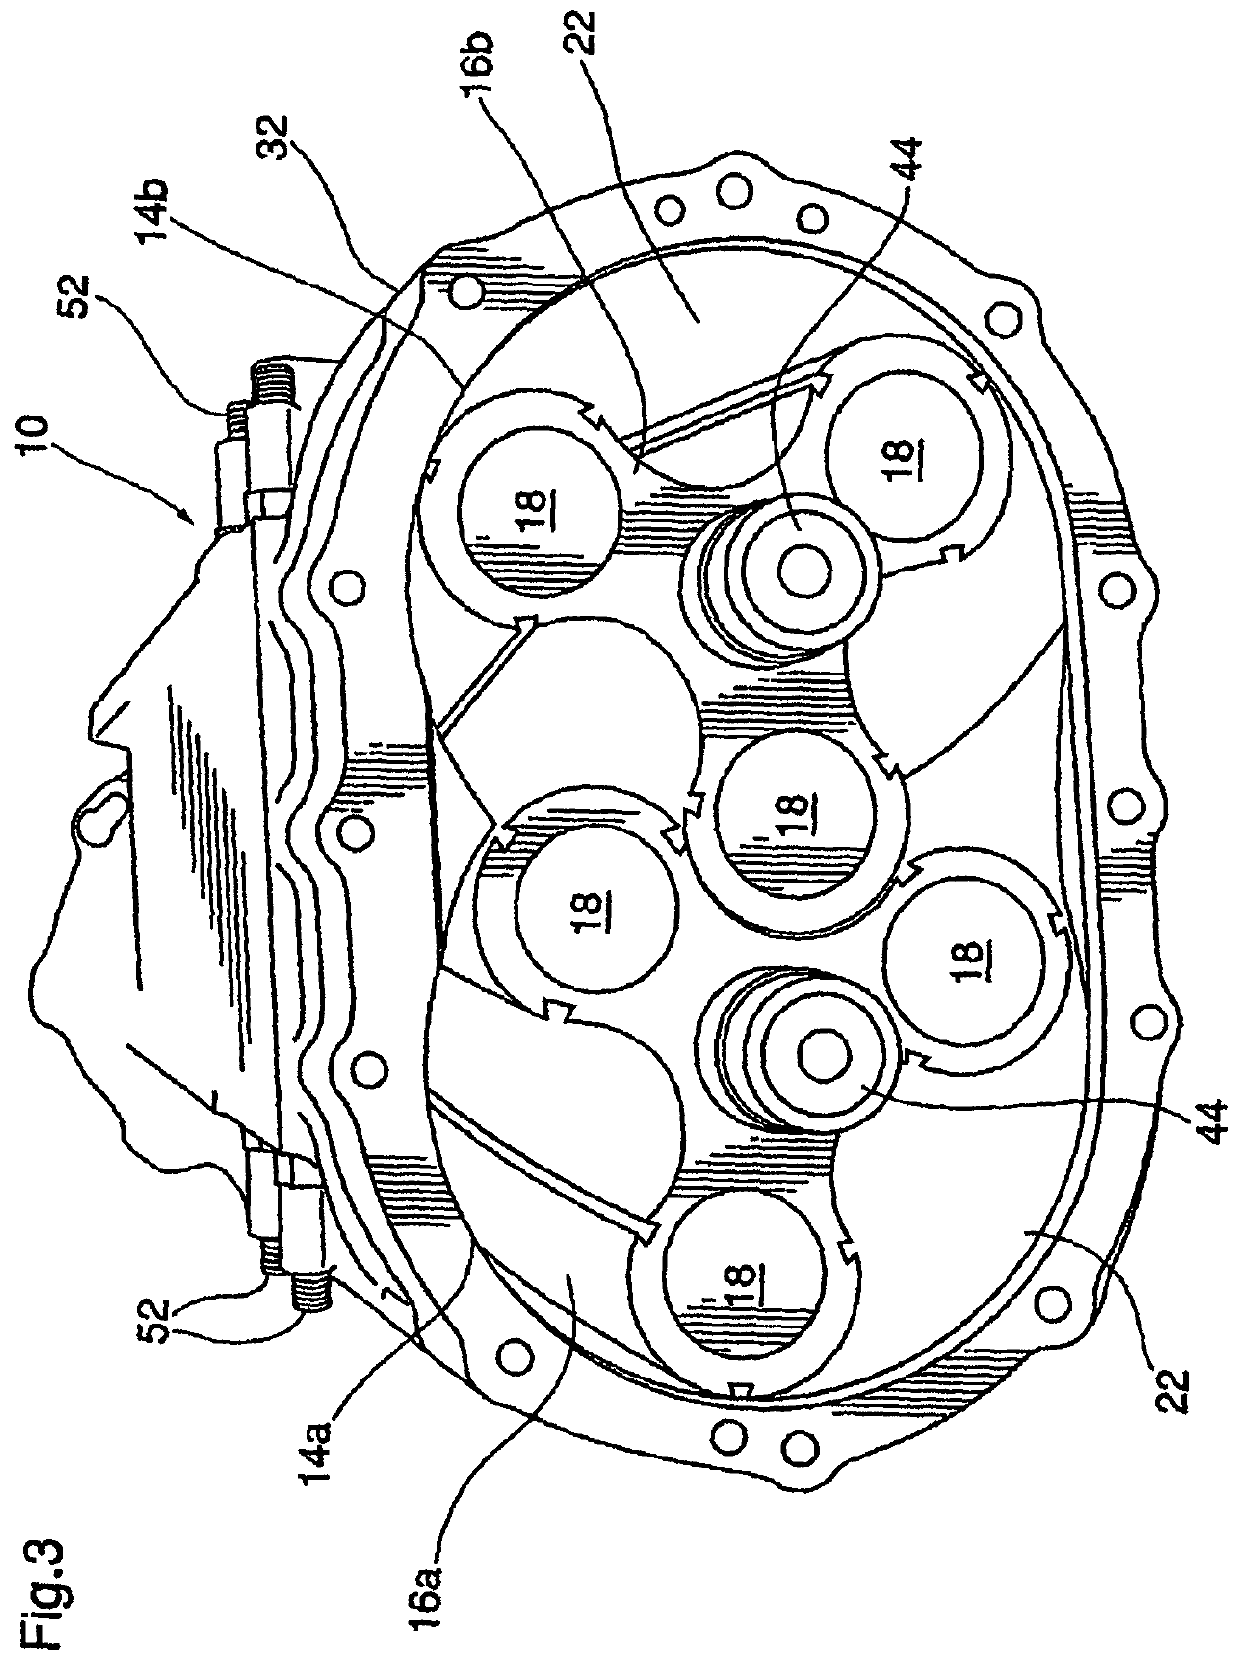 Roots type gear compressor with helical lobes having communication with discharge port